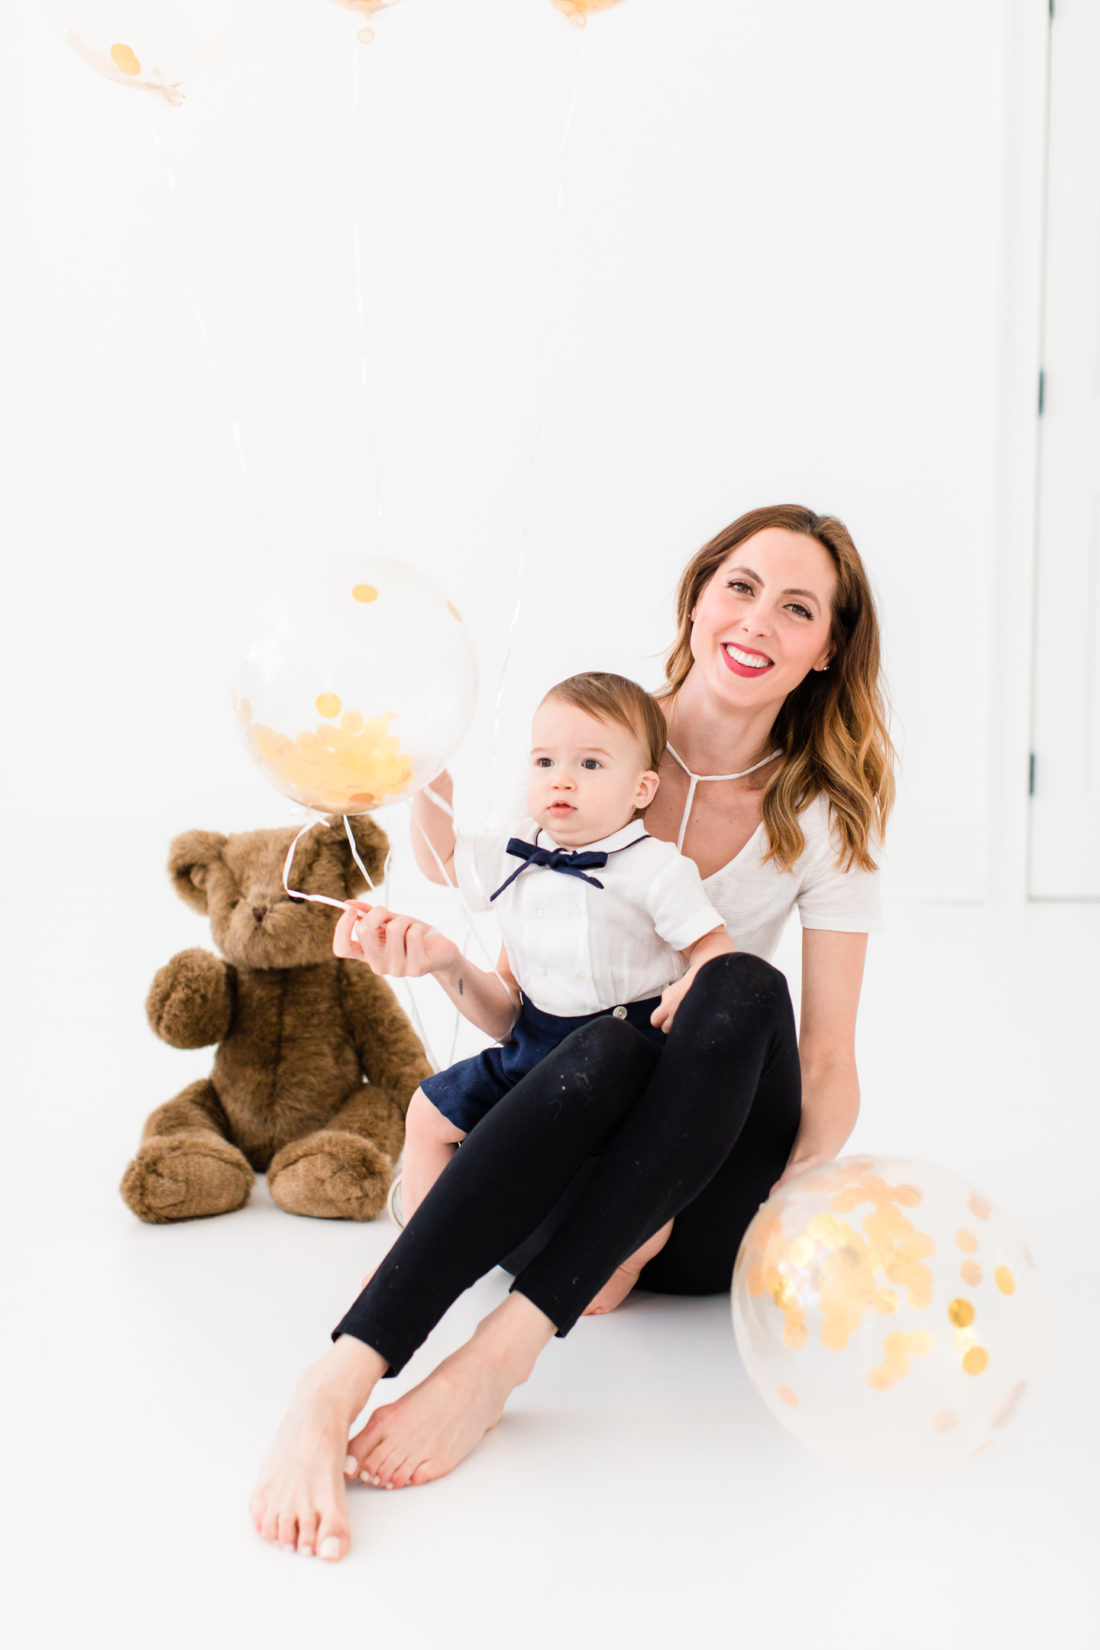 Eva Amurri Martino sits with one year old son Major for his first birthday portraits